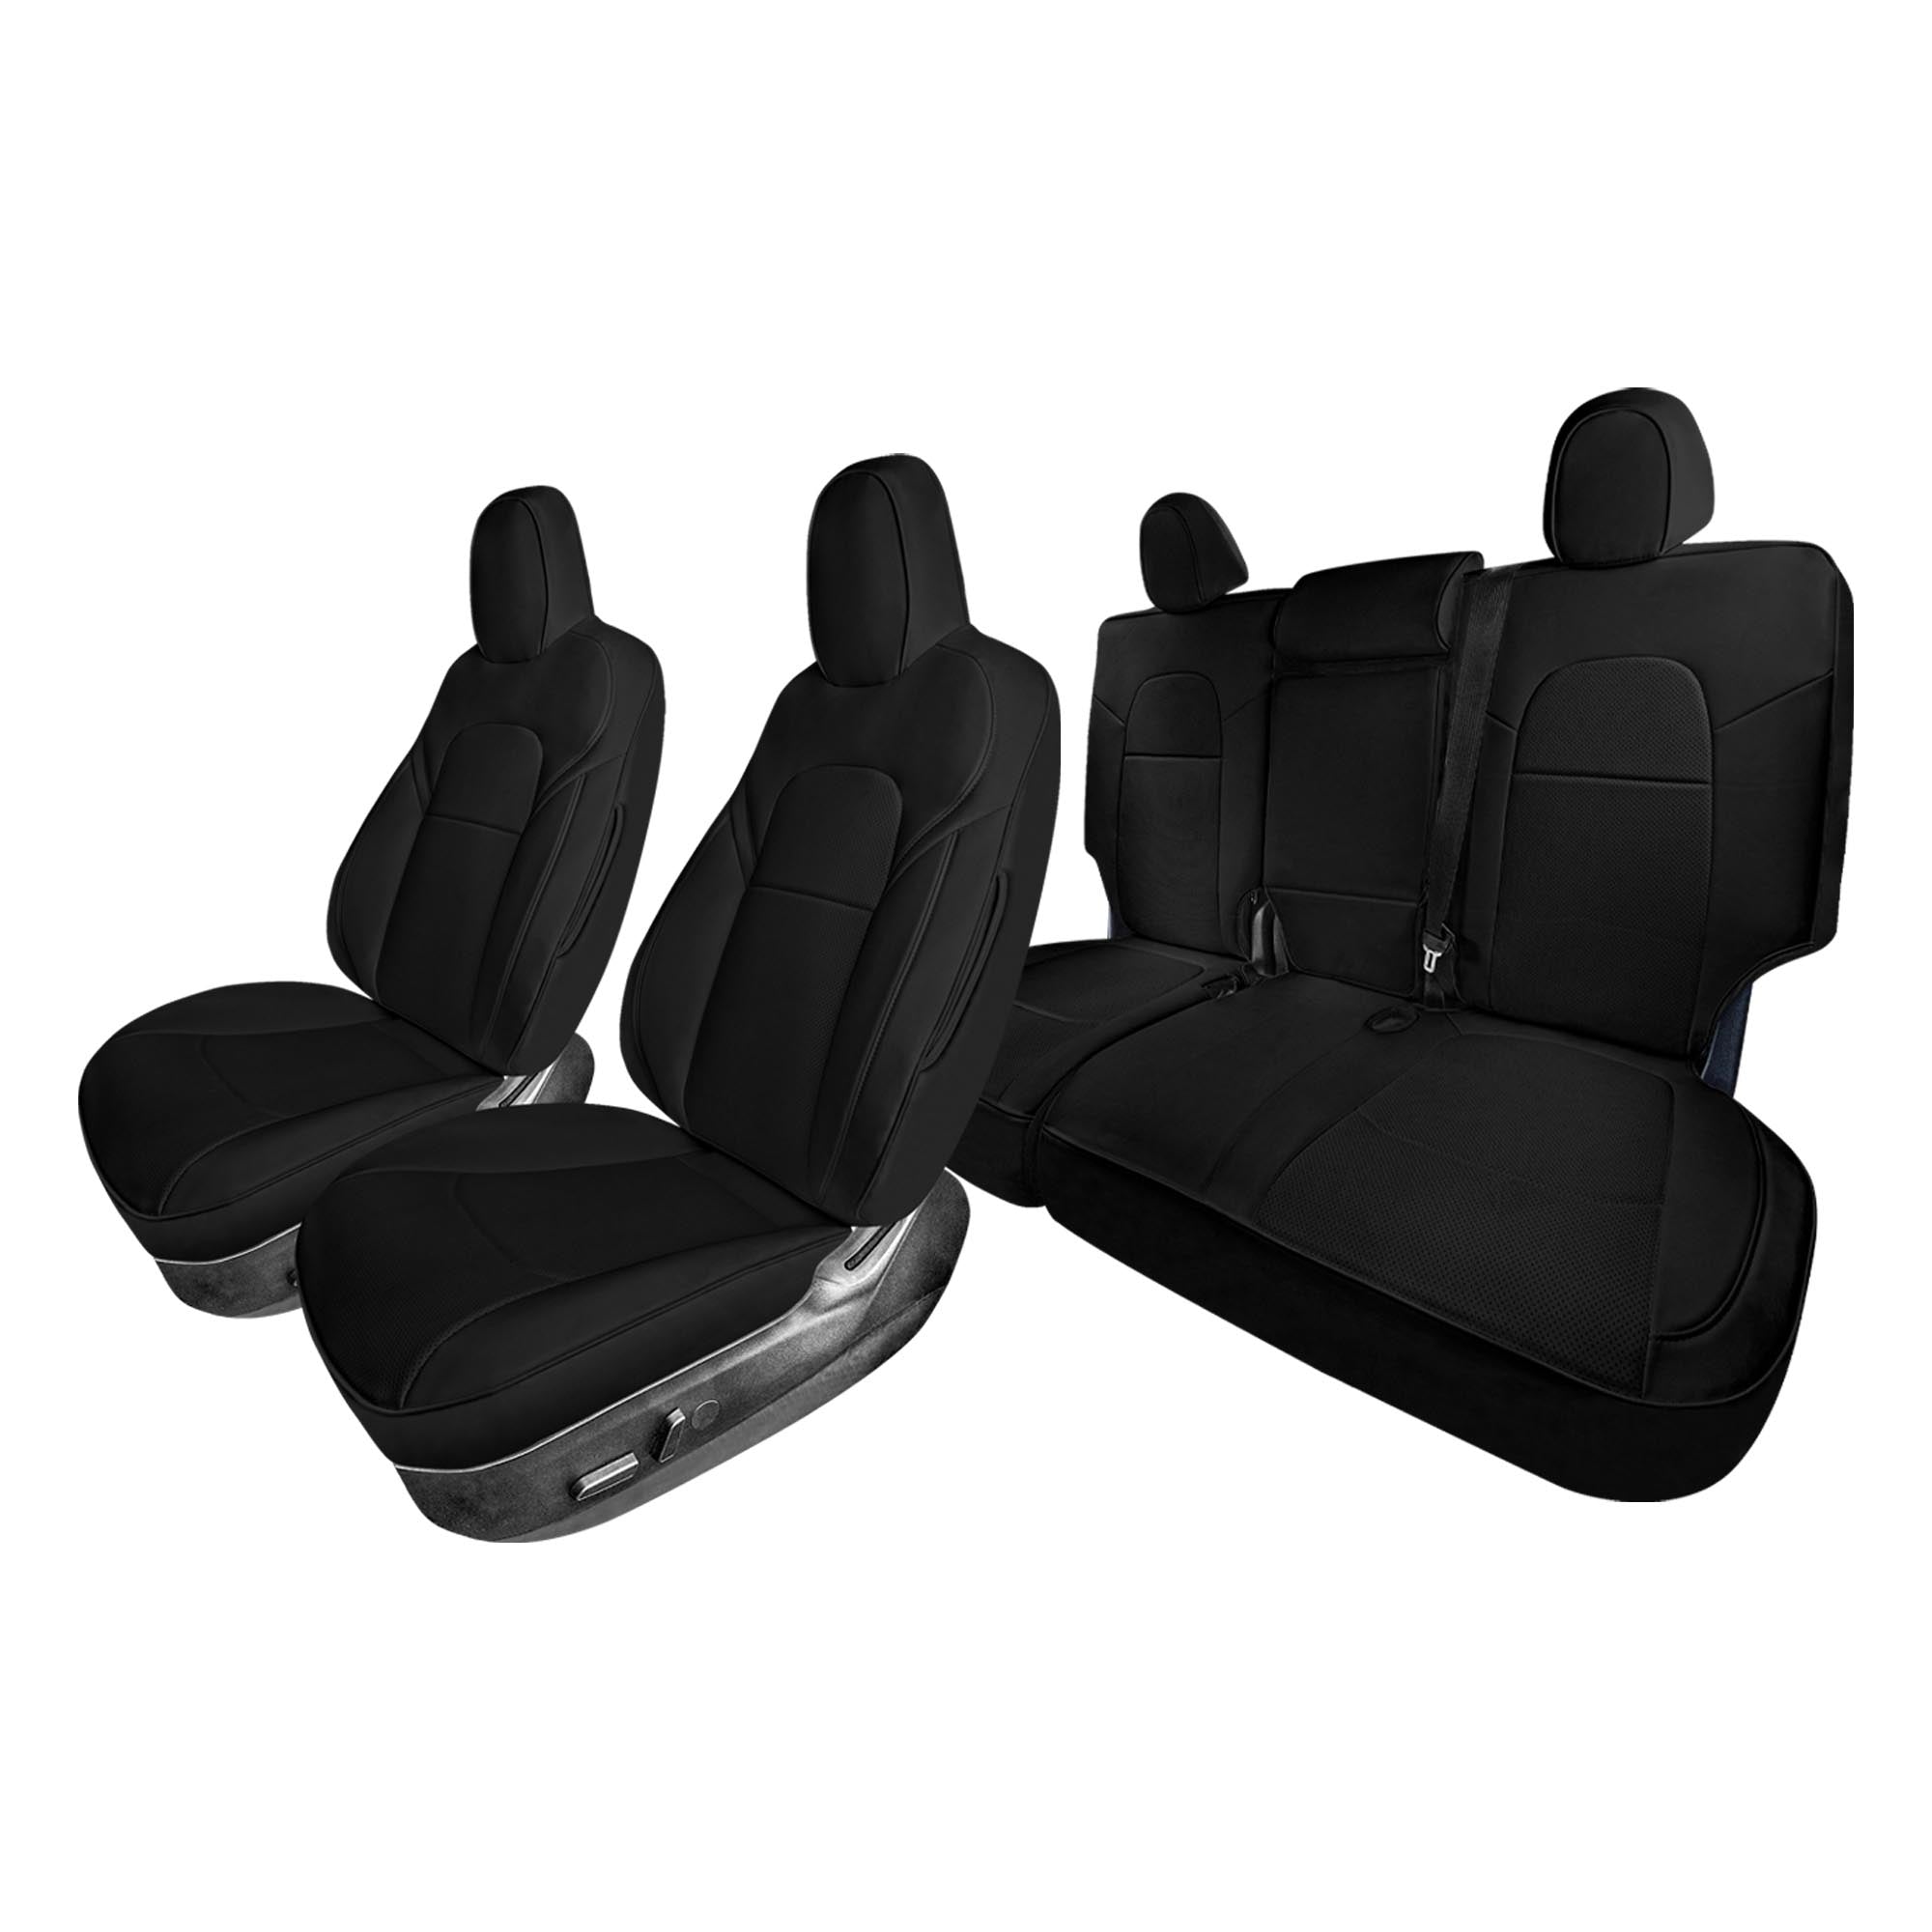 Tesla Model Y 2020 - 2022 - Full Set Seat Covers - Black Faux Leather